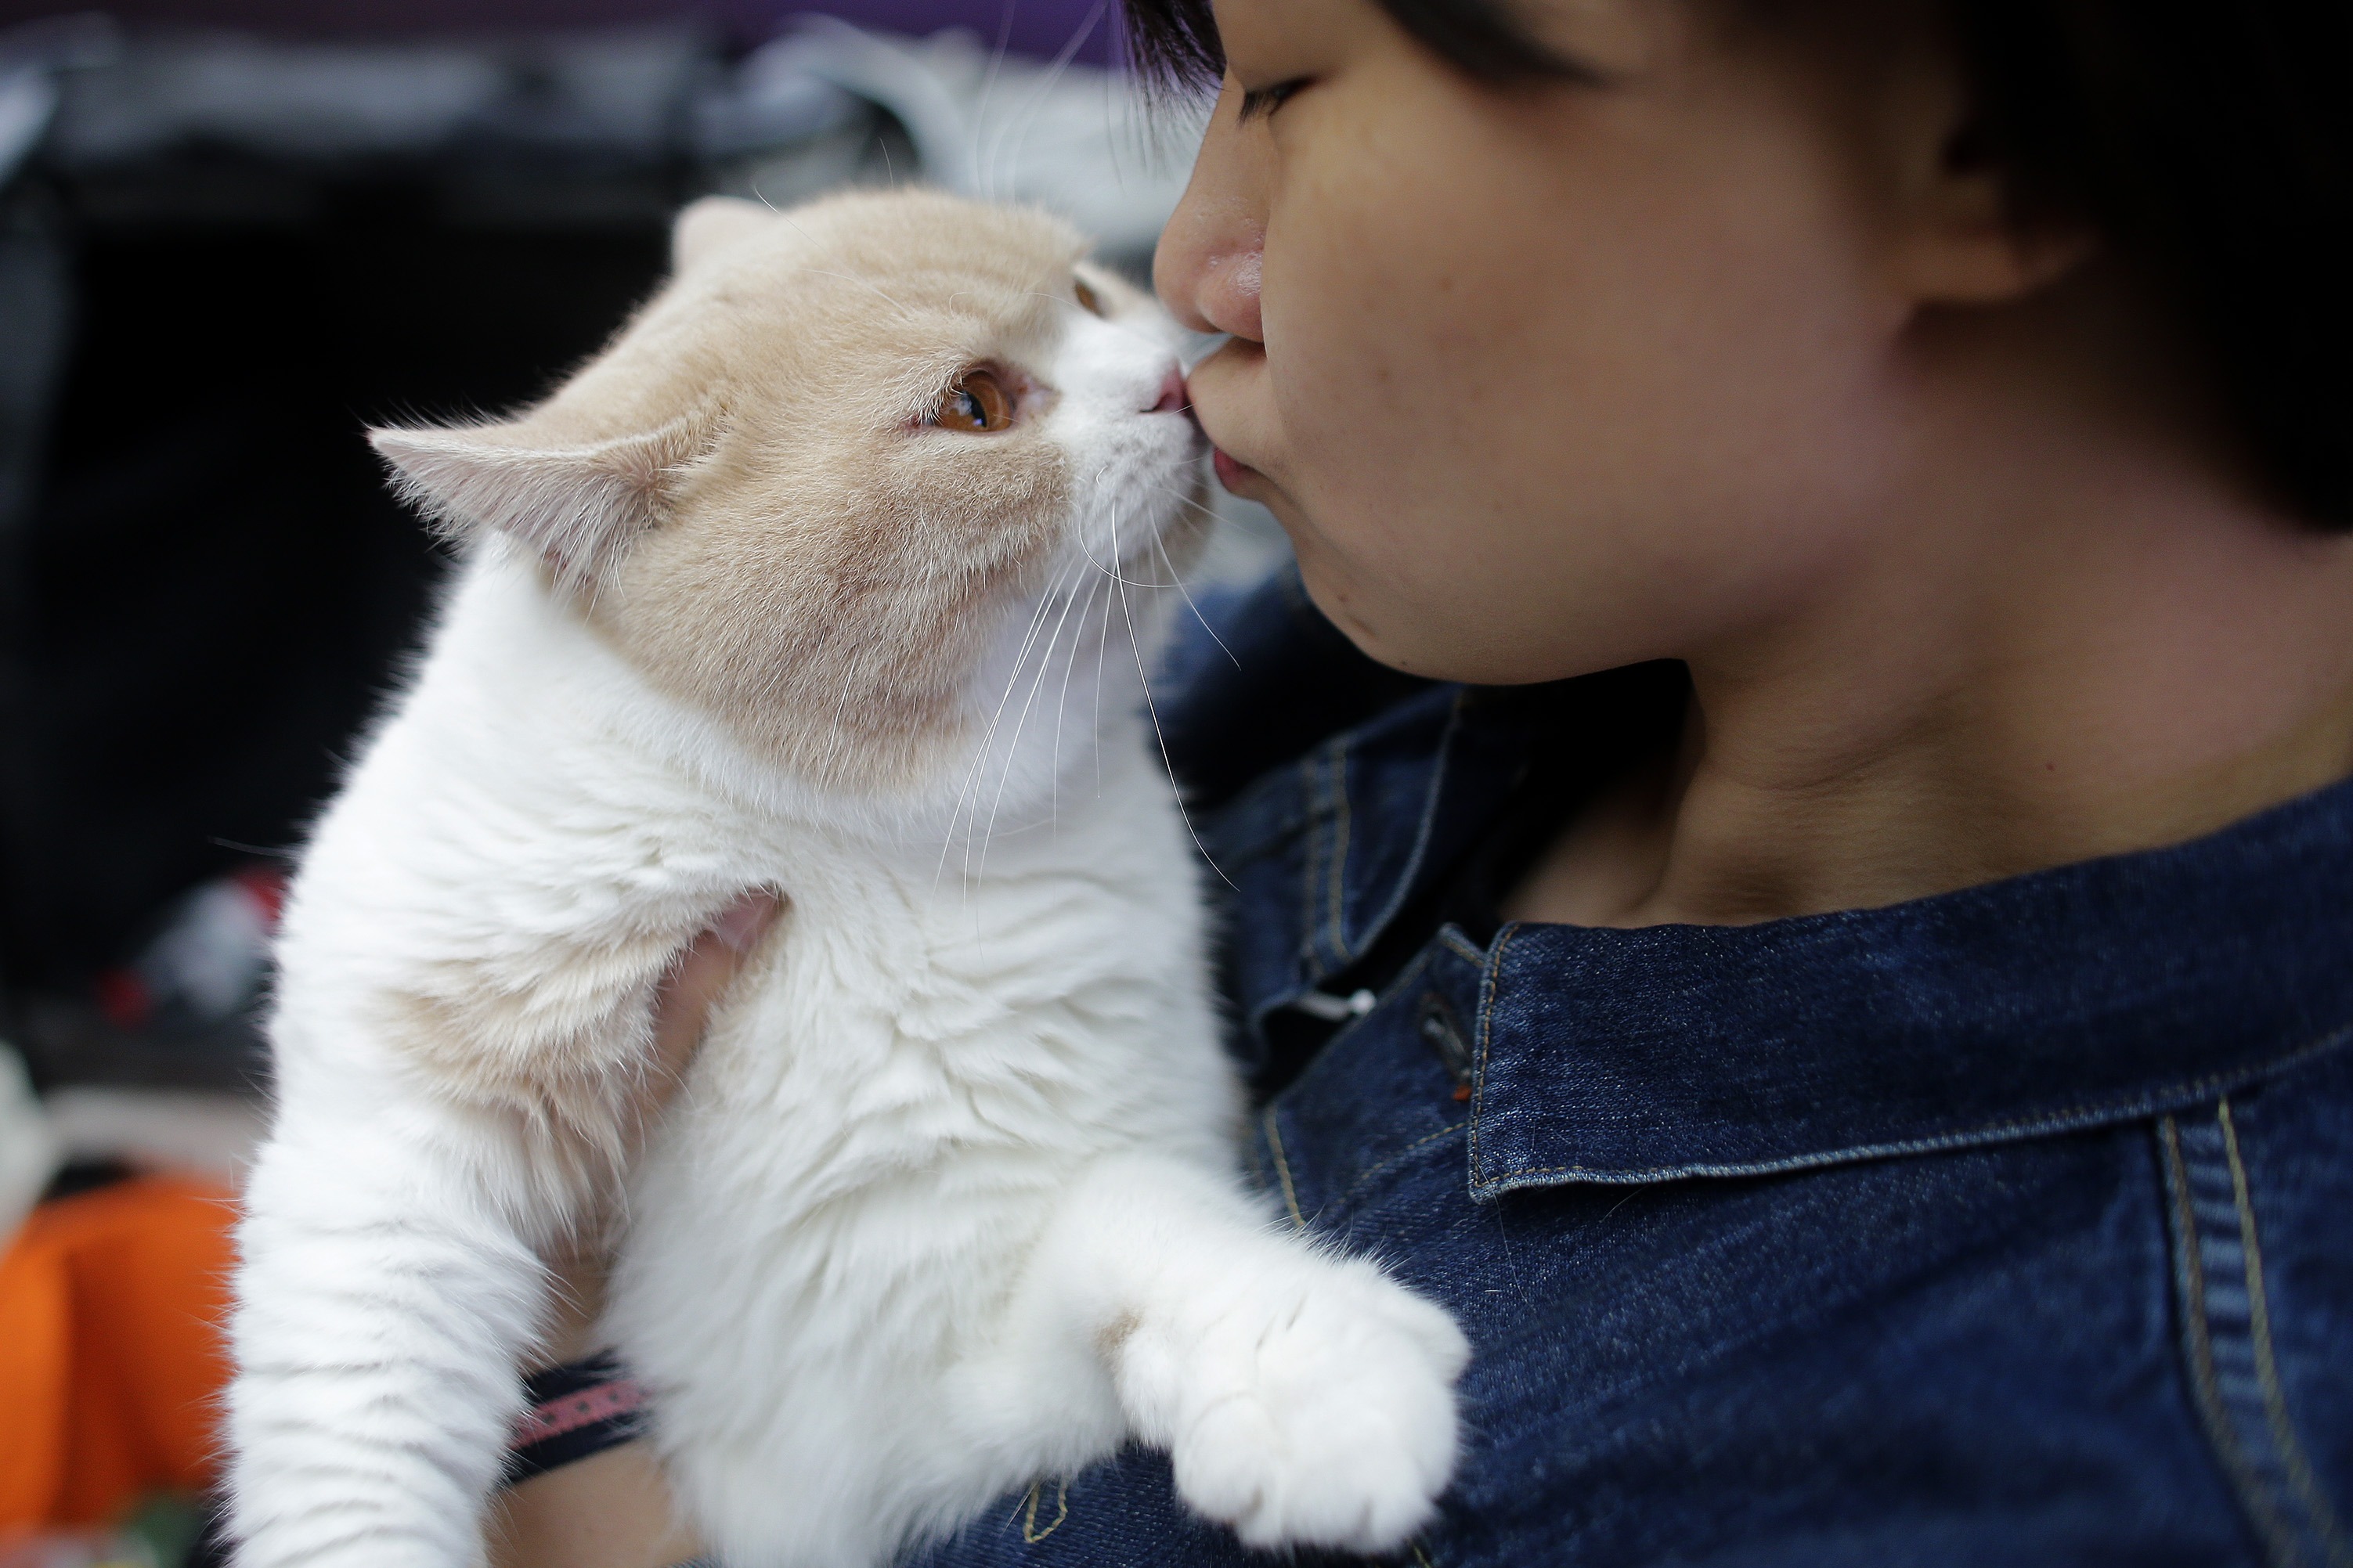 Cuddling Cats Keeps Them Healthy Say Scientists Which Means You Now Have A Legit Excuse To Be A Full On Cat Lady